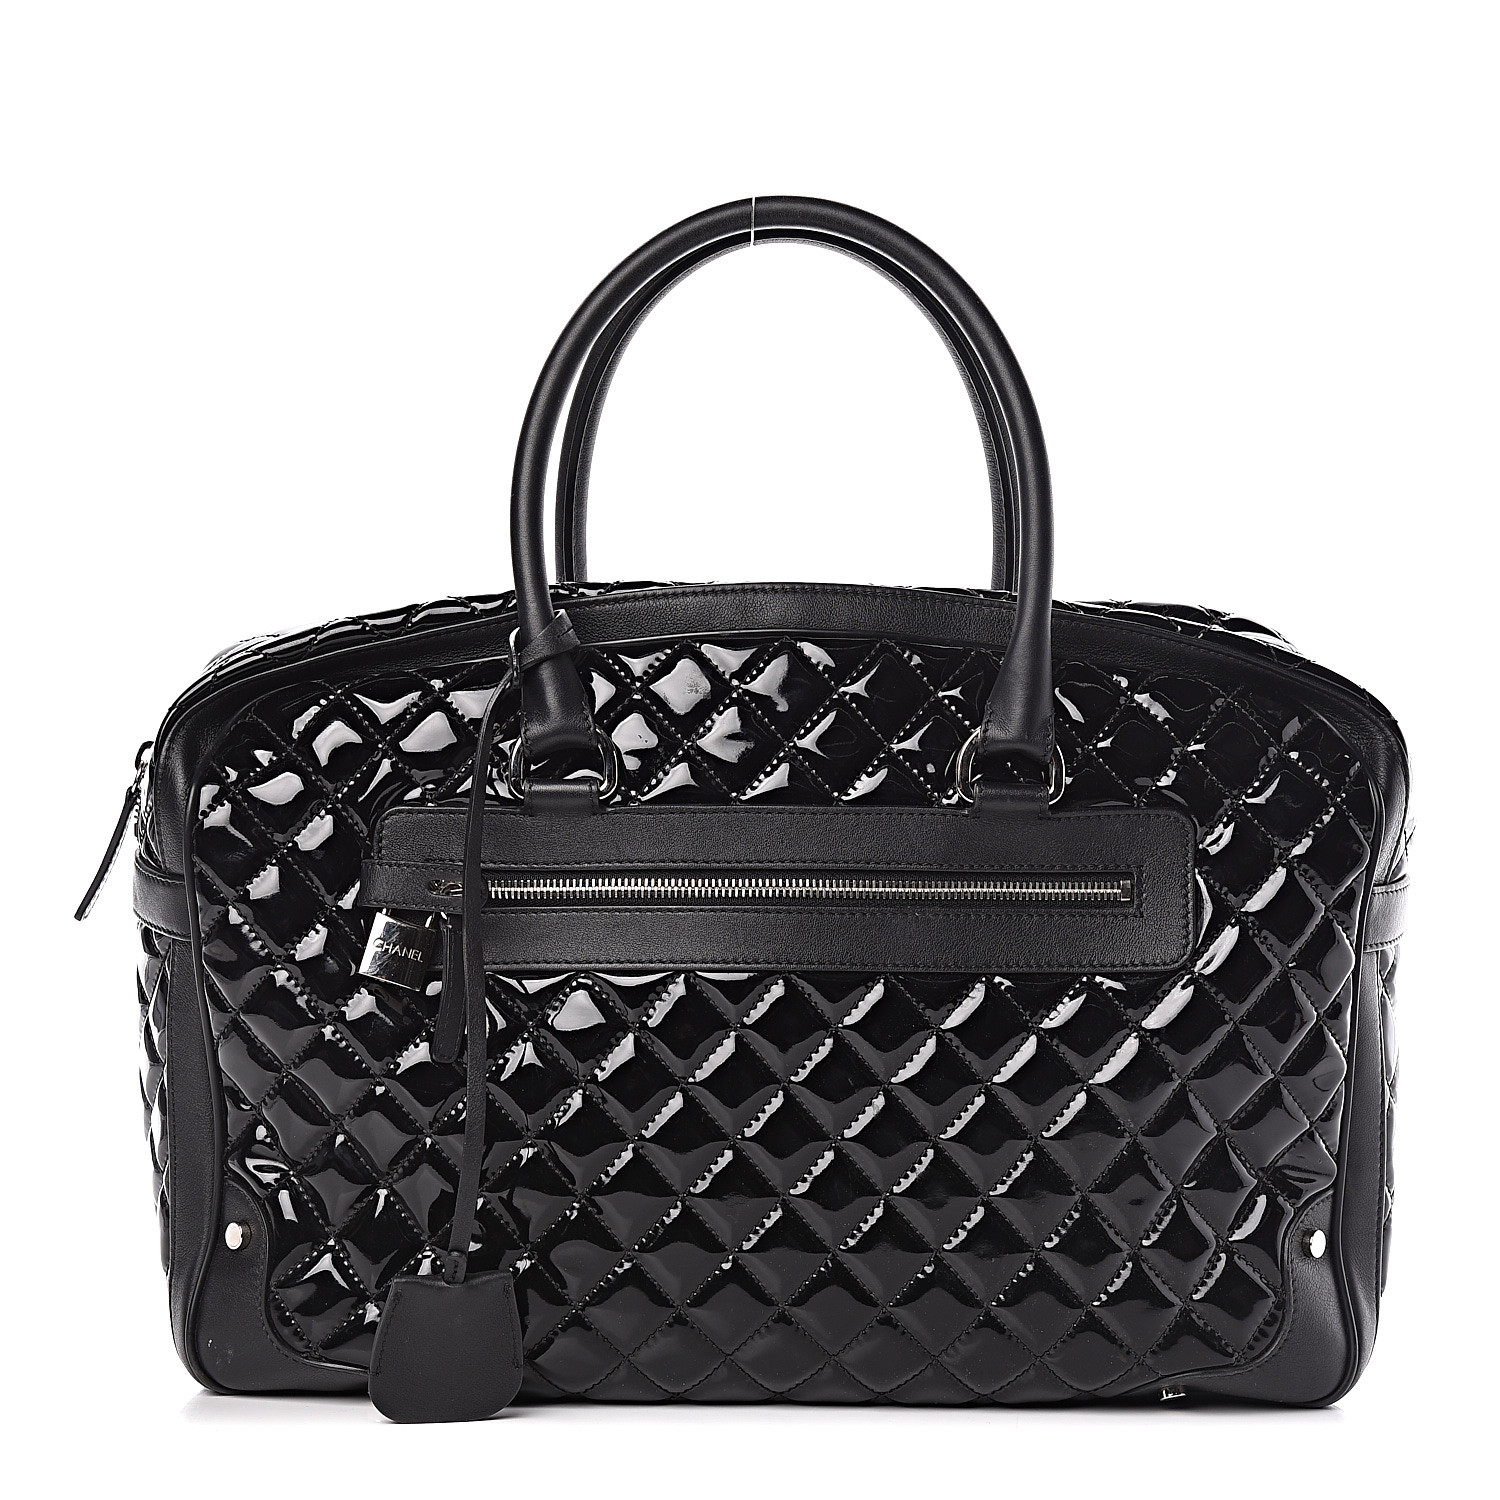 CHANEL Patent Quilted Travel Bag Black 490521